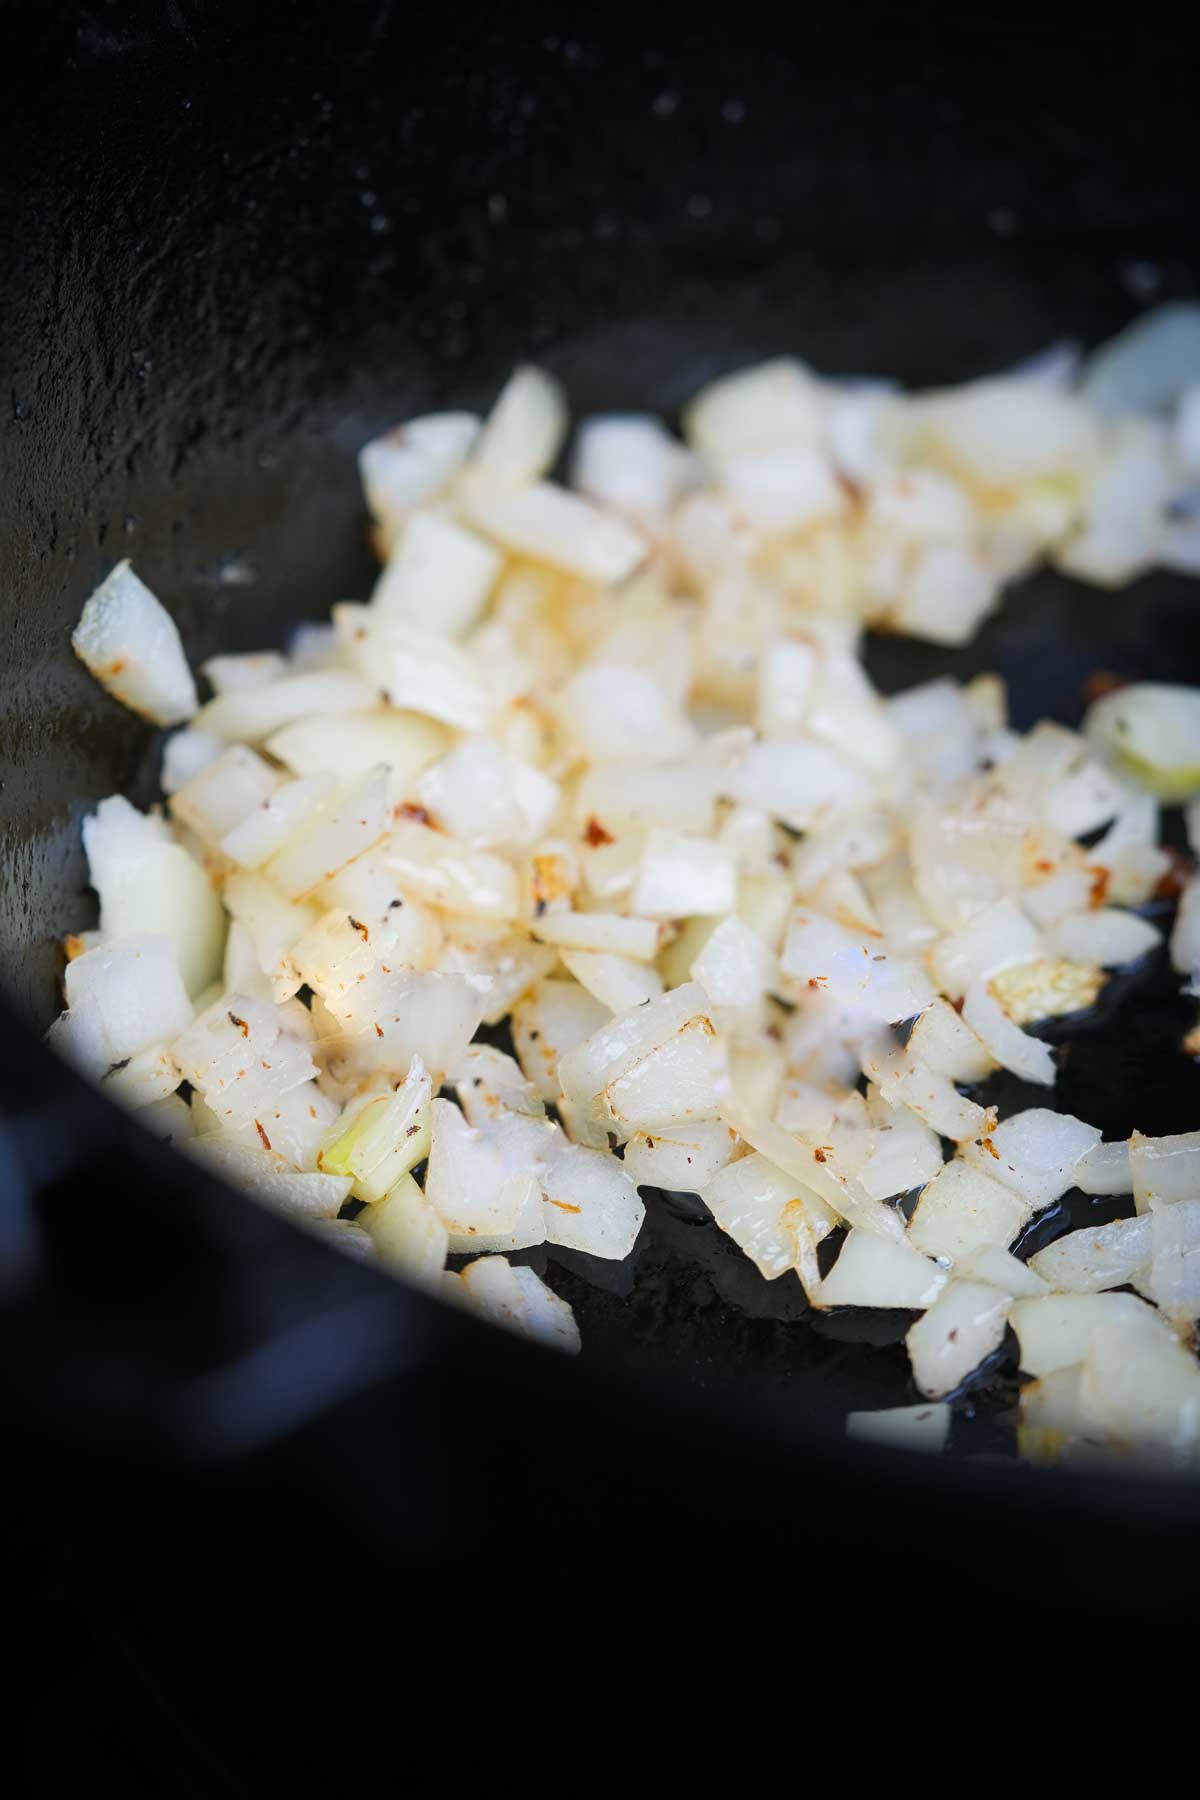 Onions are being cooked in a frying pan.